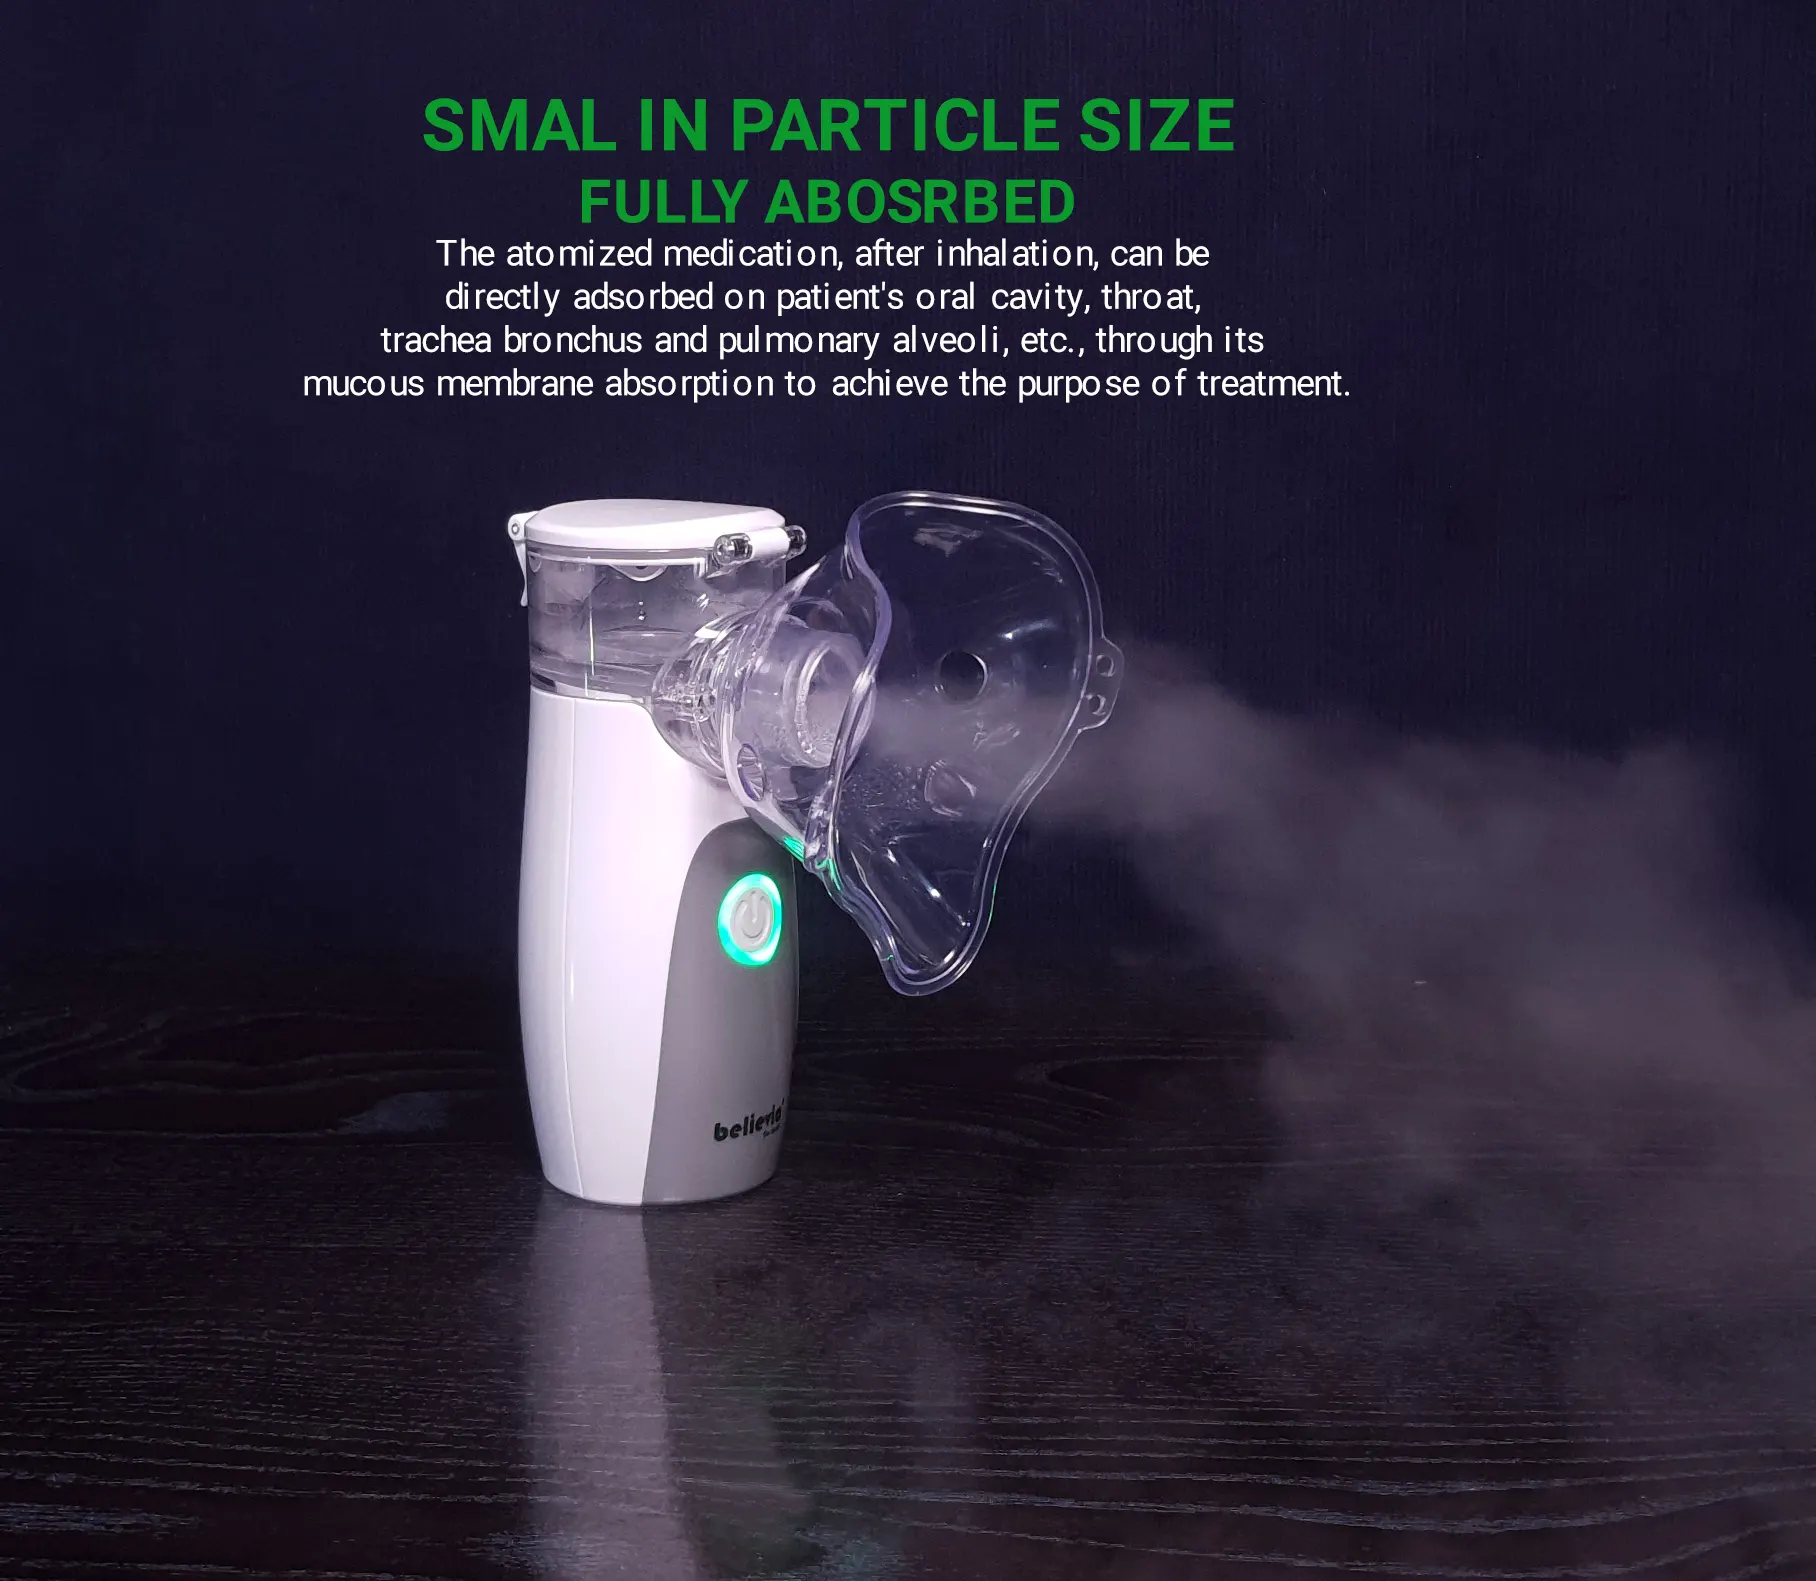 Handheld Portable Nebulizer Machine Believia fully absorbed particles